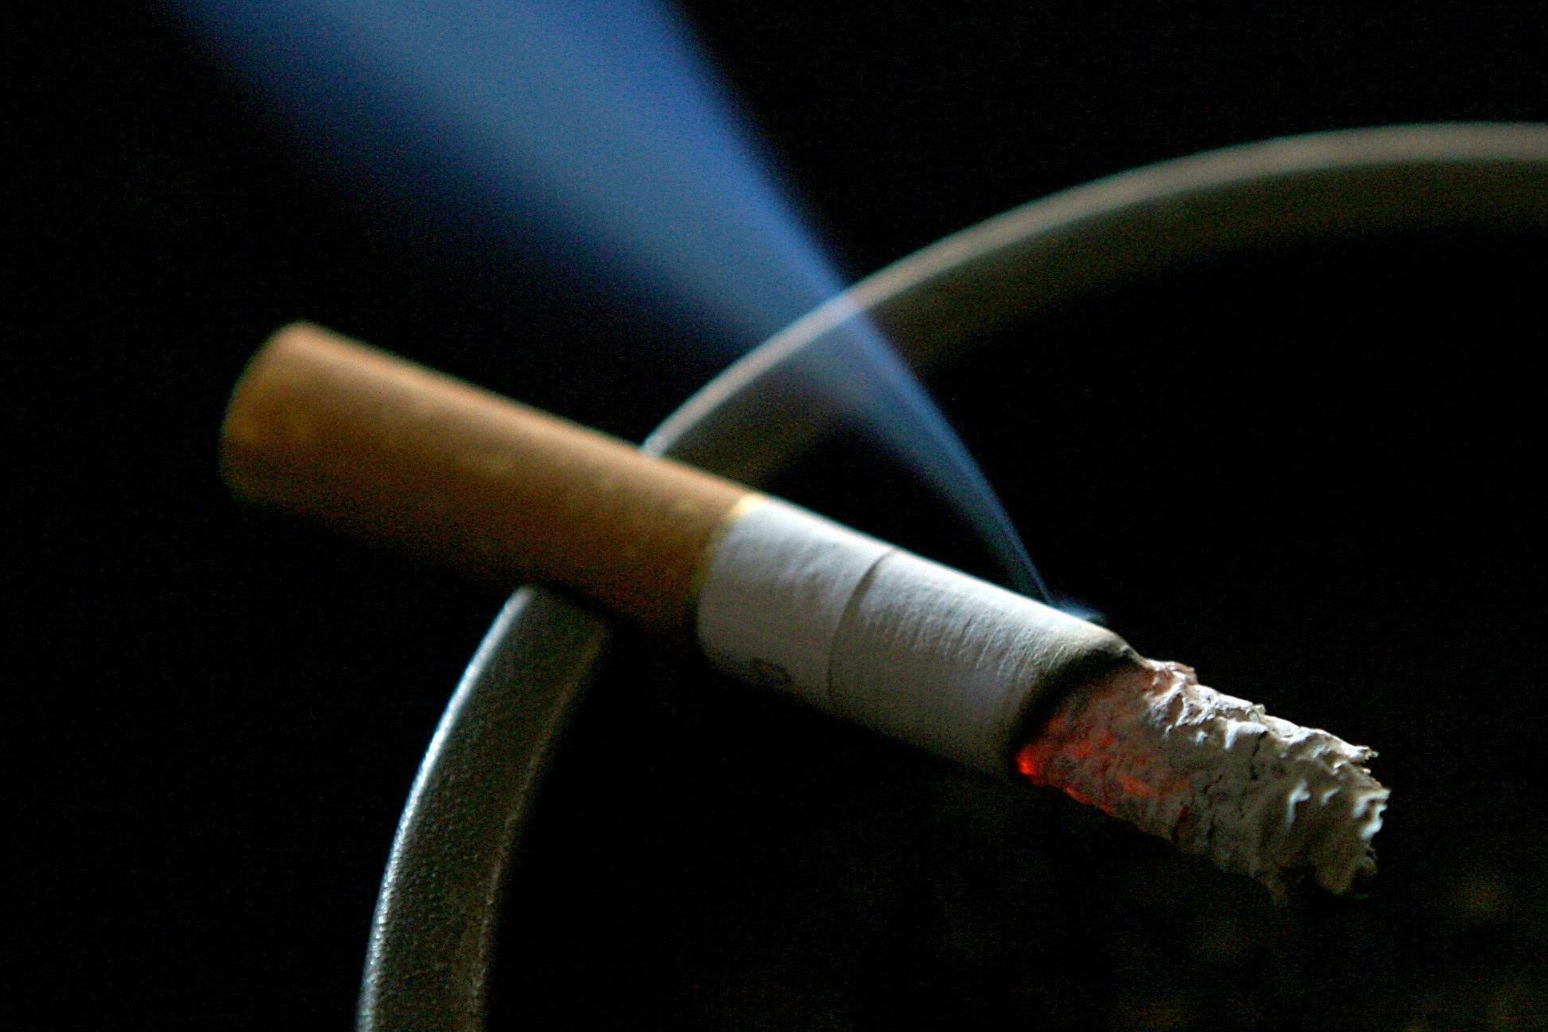 Smoking among young people rose by quarter in first lockdown 